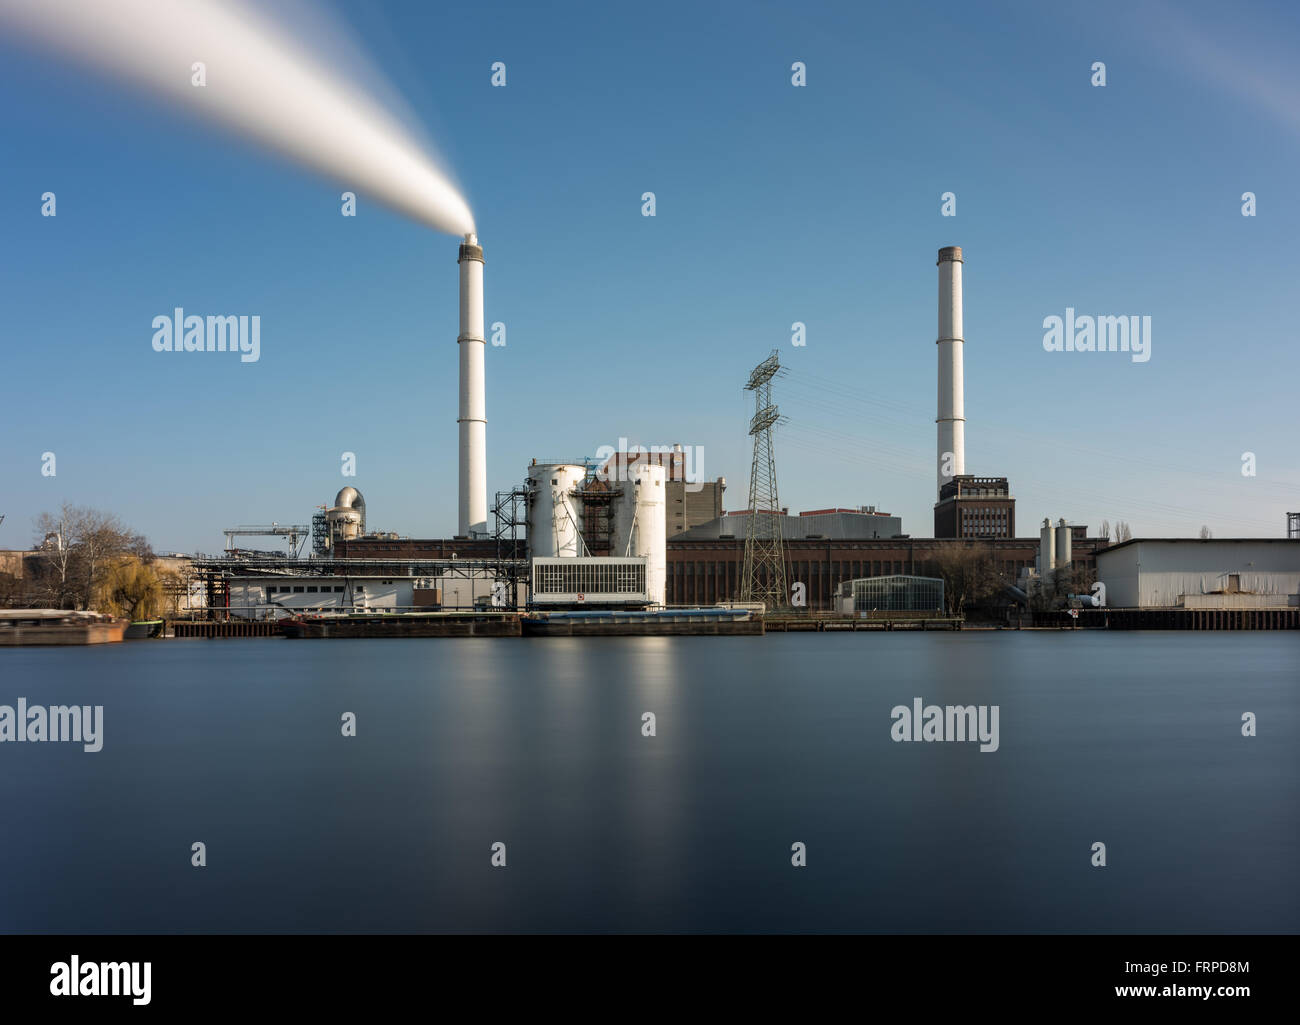 View over the Spree on the Klingenberg power plant, Rummelsburg, Berlin, Germany Stock Photo